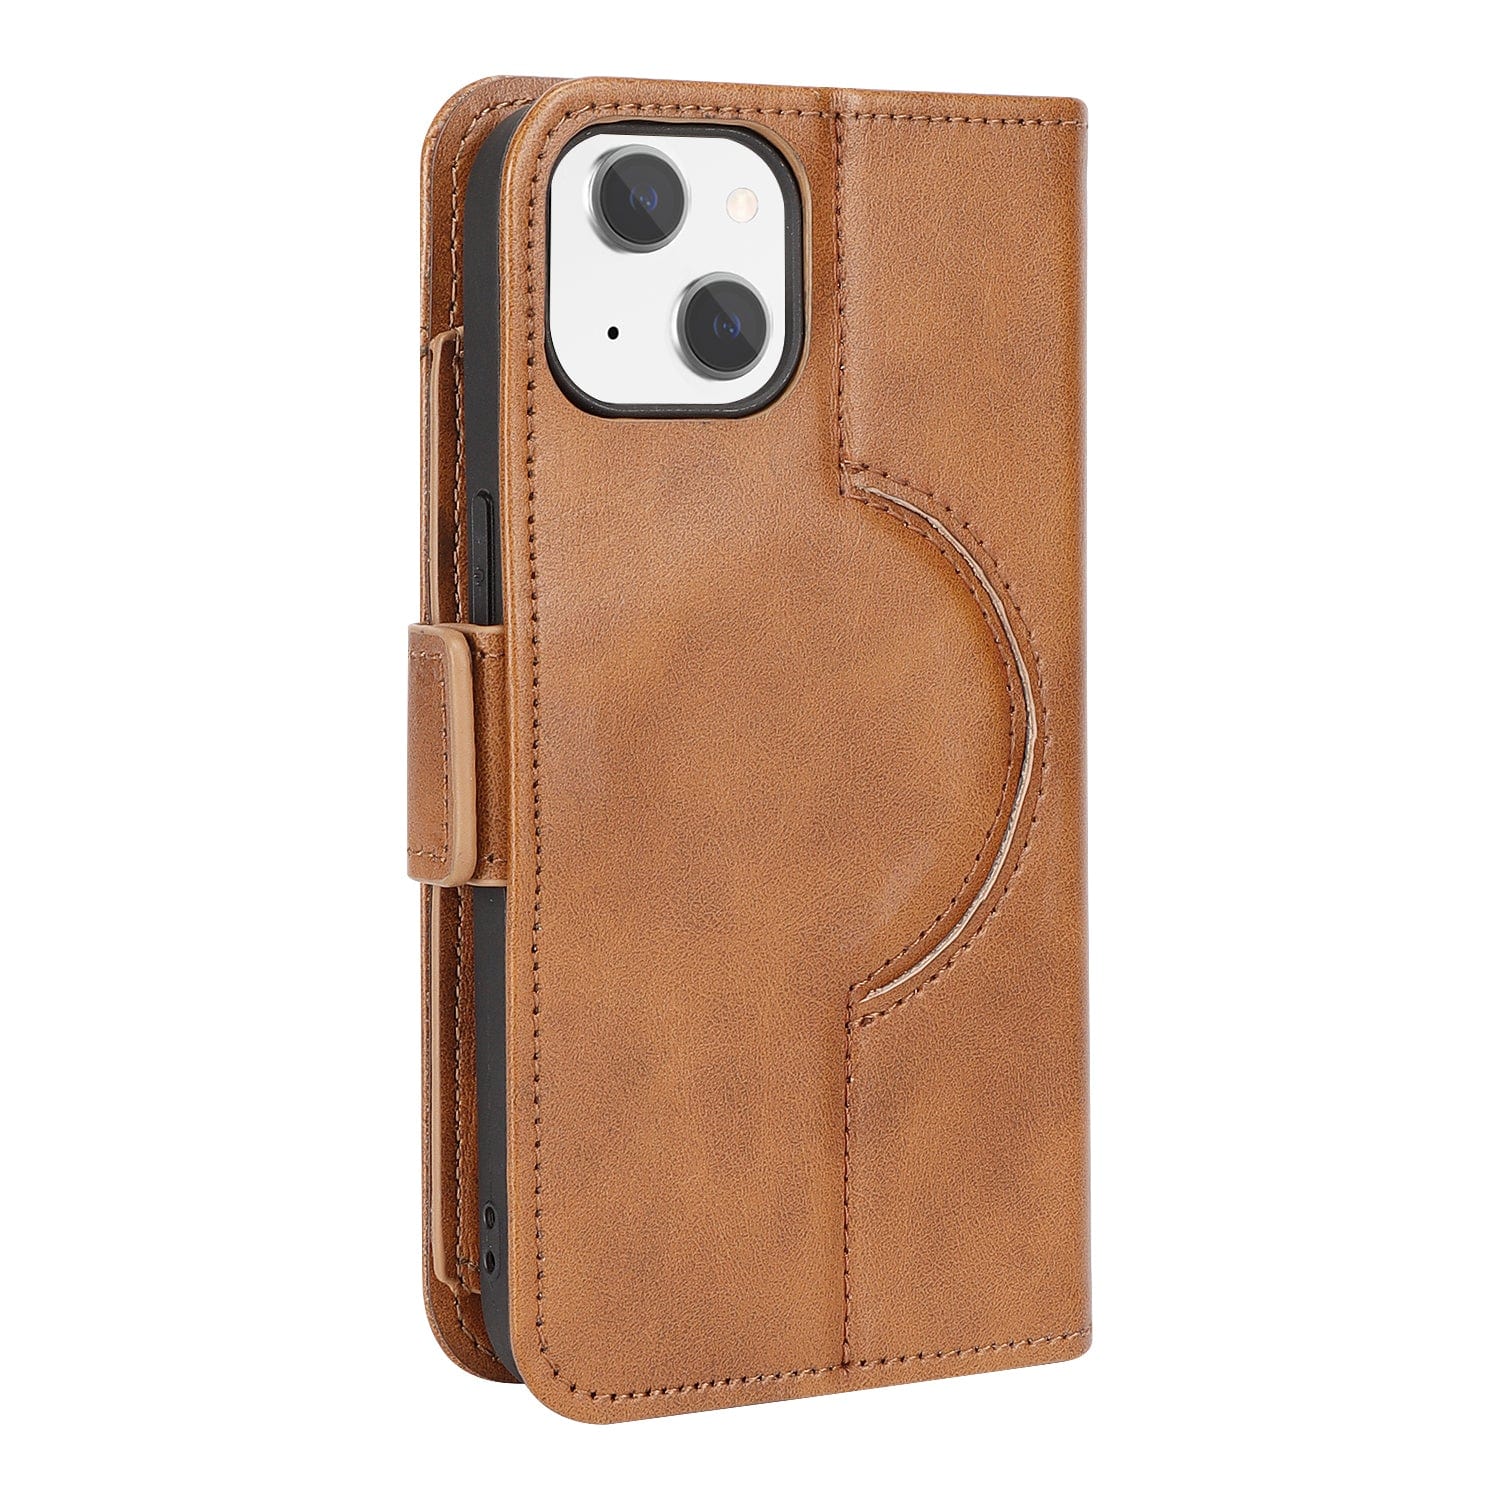 Genuine MagSafe Leather Case For iPhone 12 Series